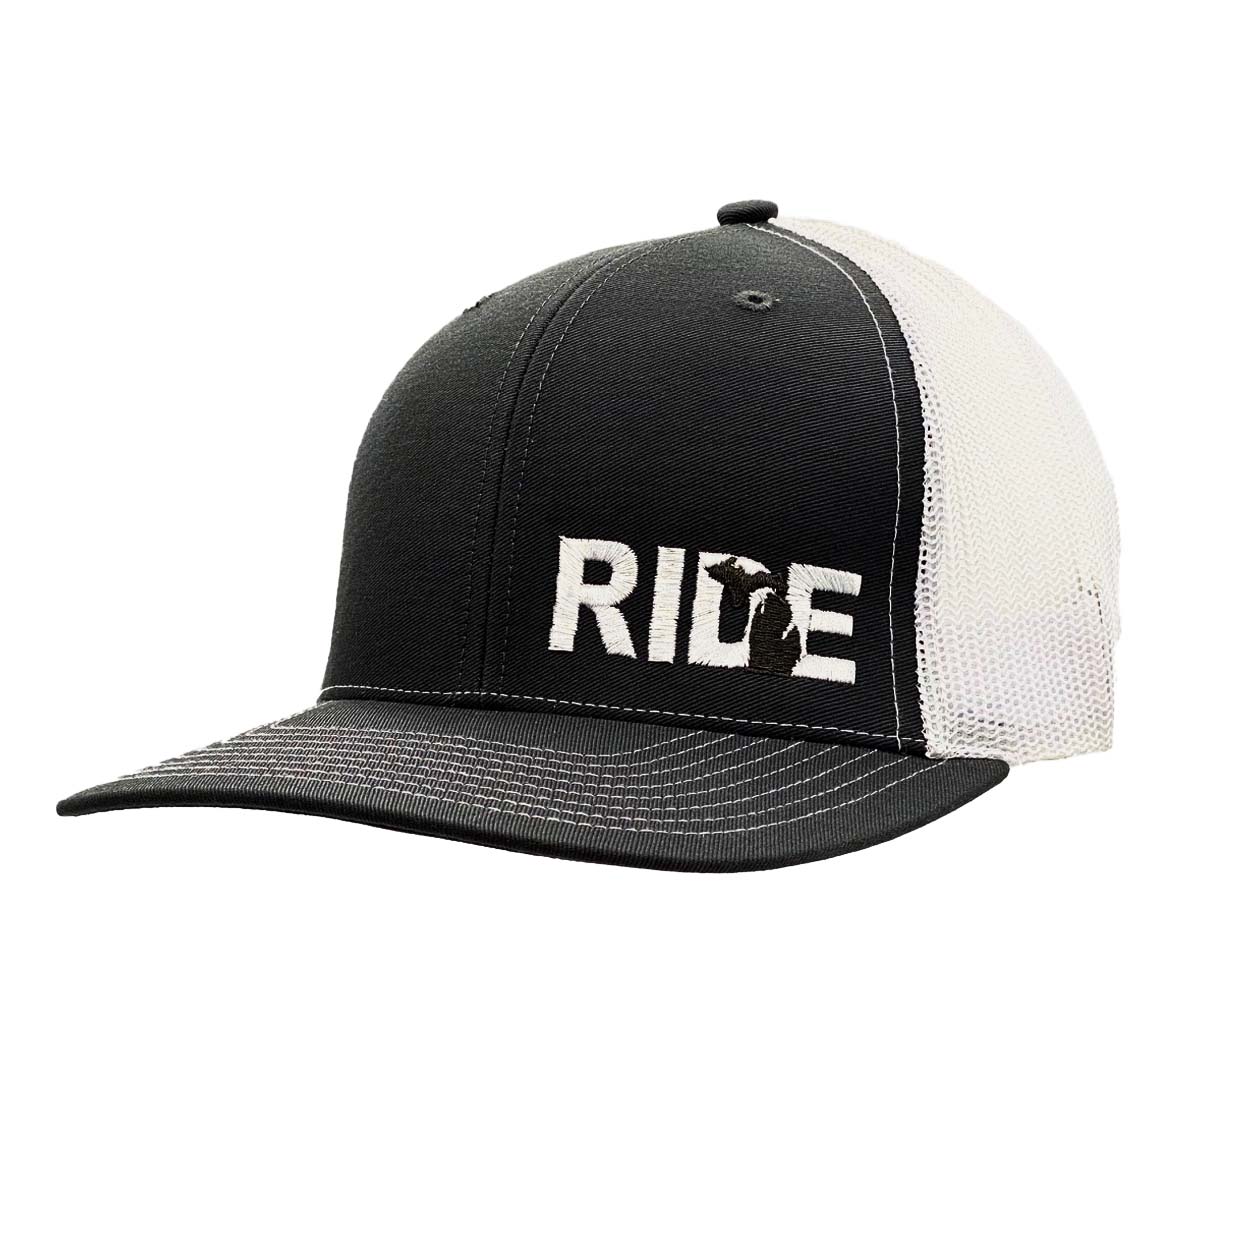 Ride Michigan Night Out Embroidered Snapback Trucker Hat Black/Charcoal